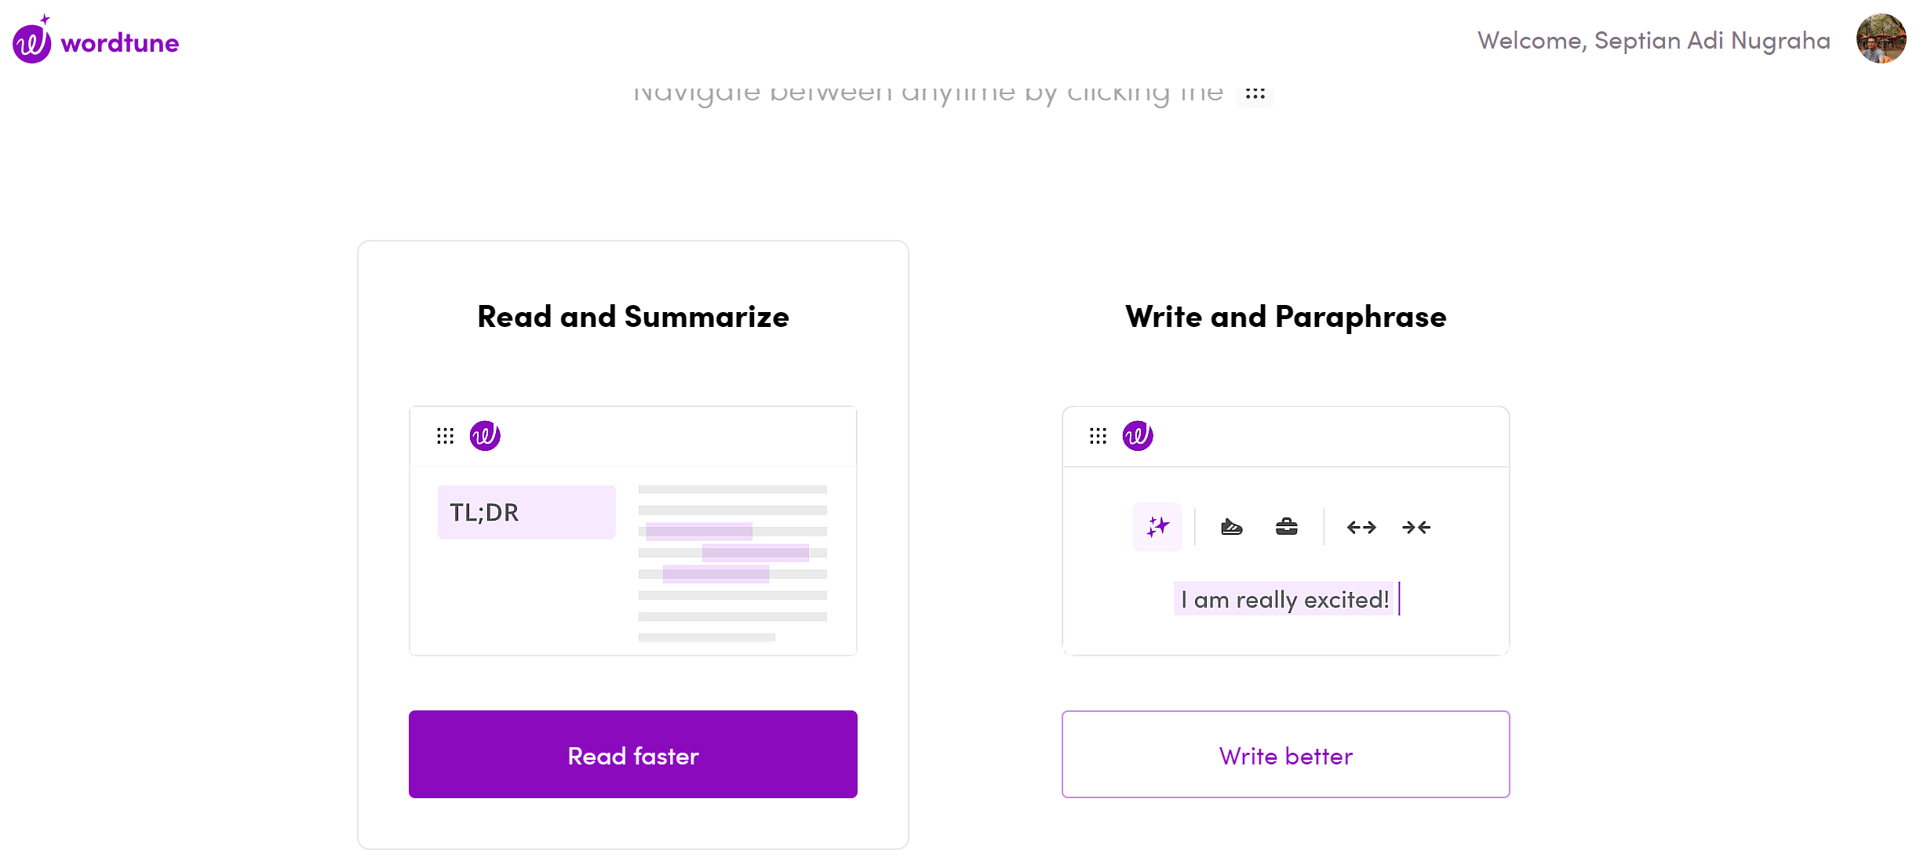 Product gateway page; the user can choose whether to read faster or write better